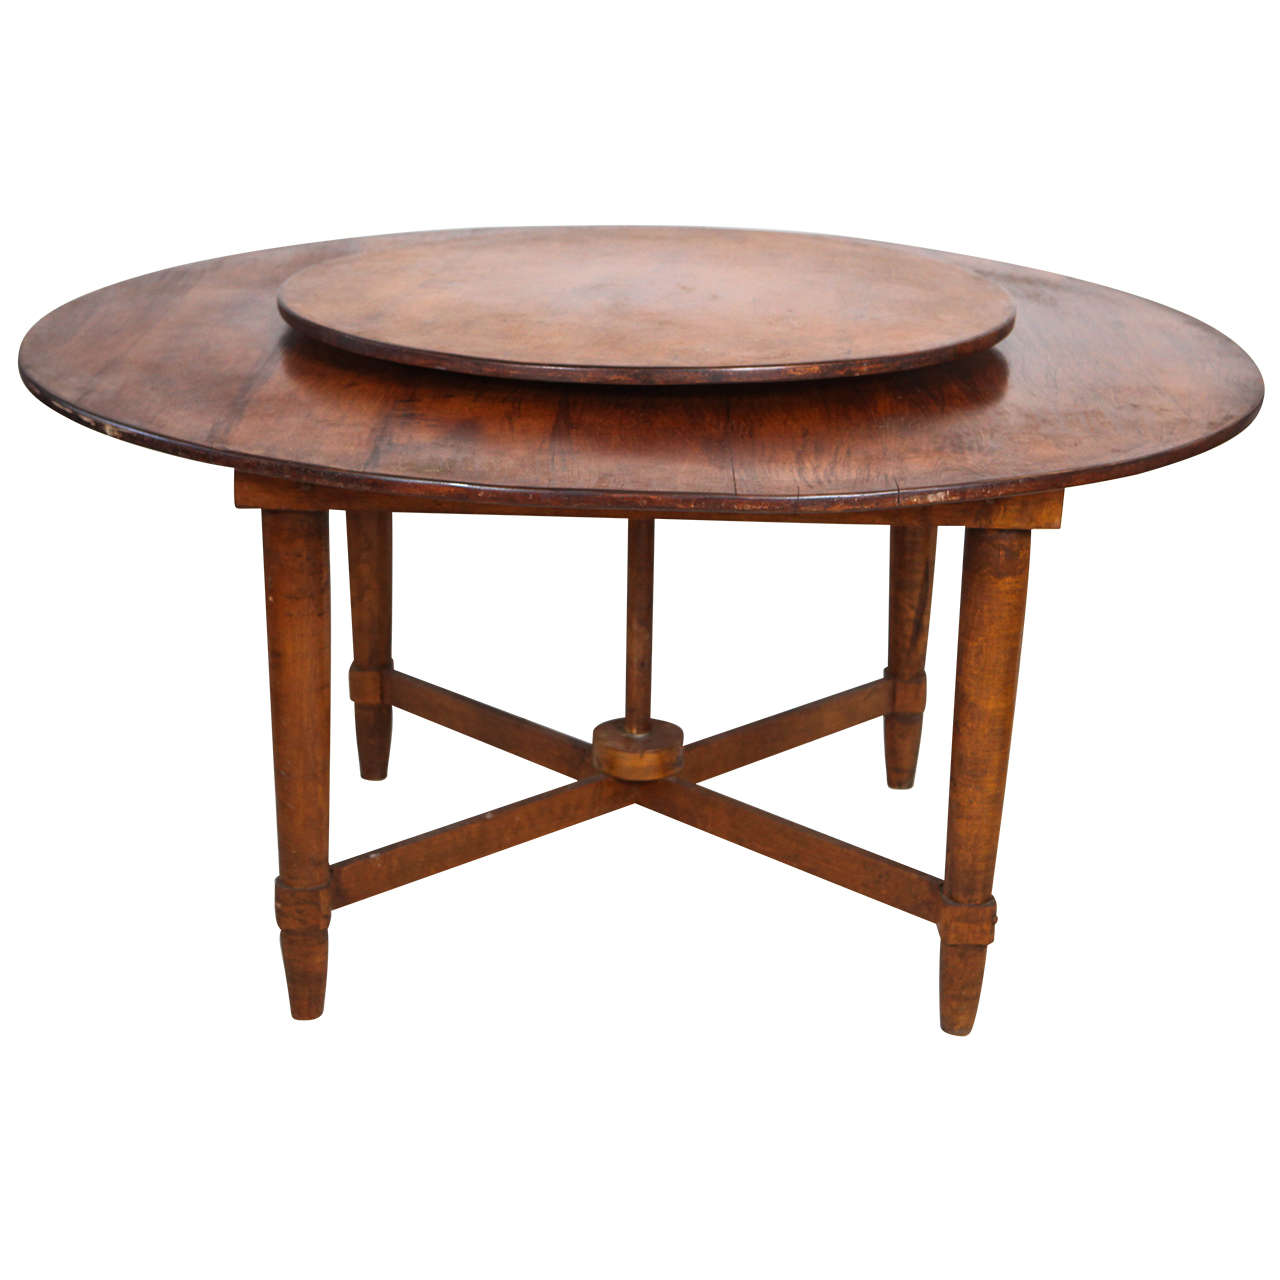 Distinct Rustic Round Dining Table With, Round Kitchen Table With Built In Lazy Susan